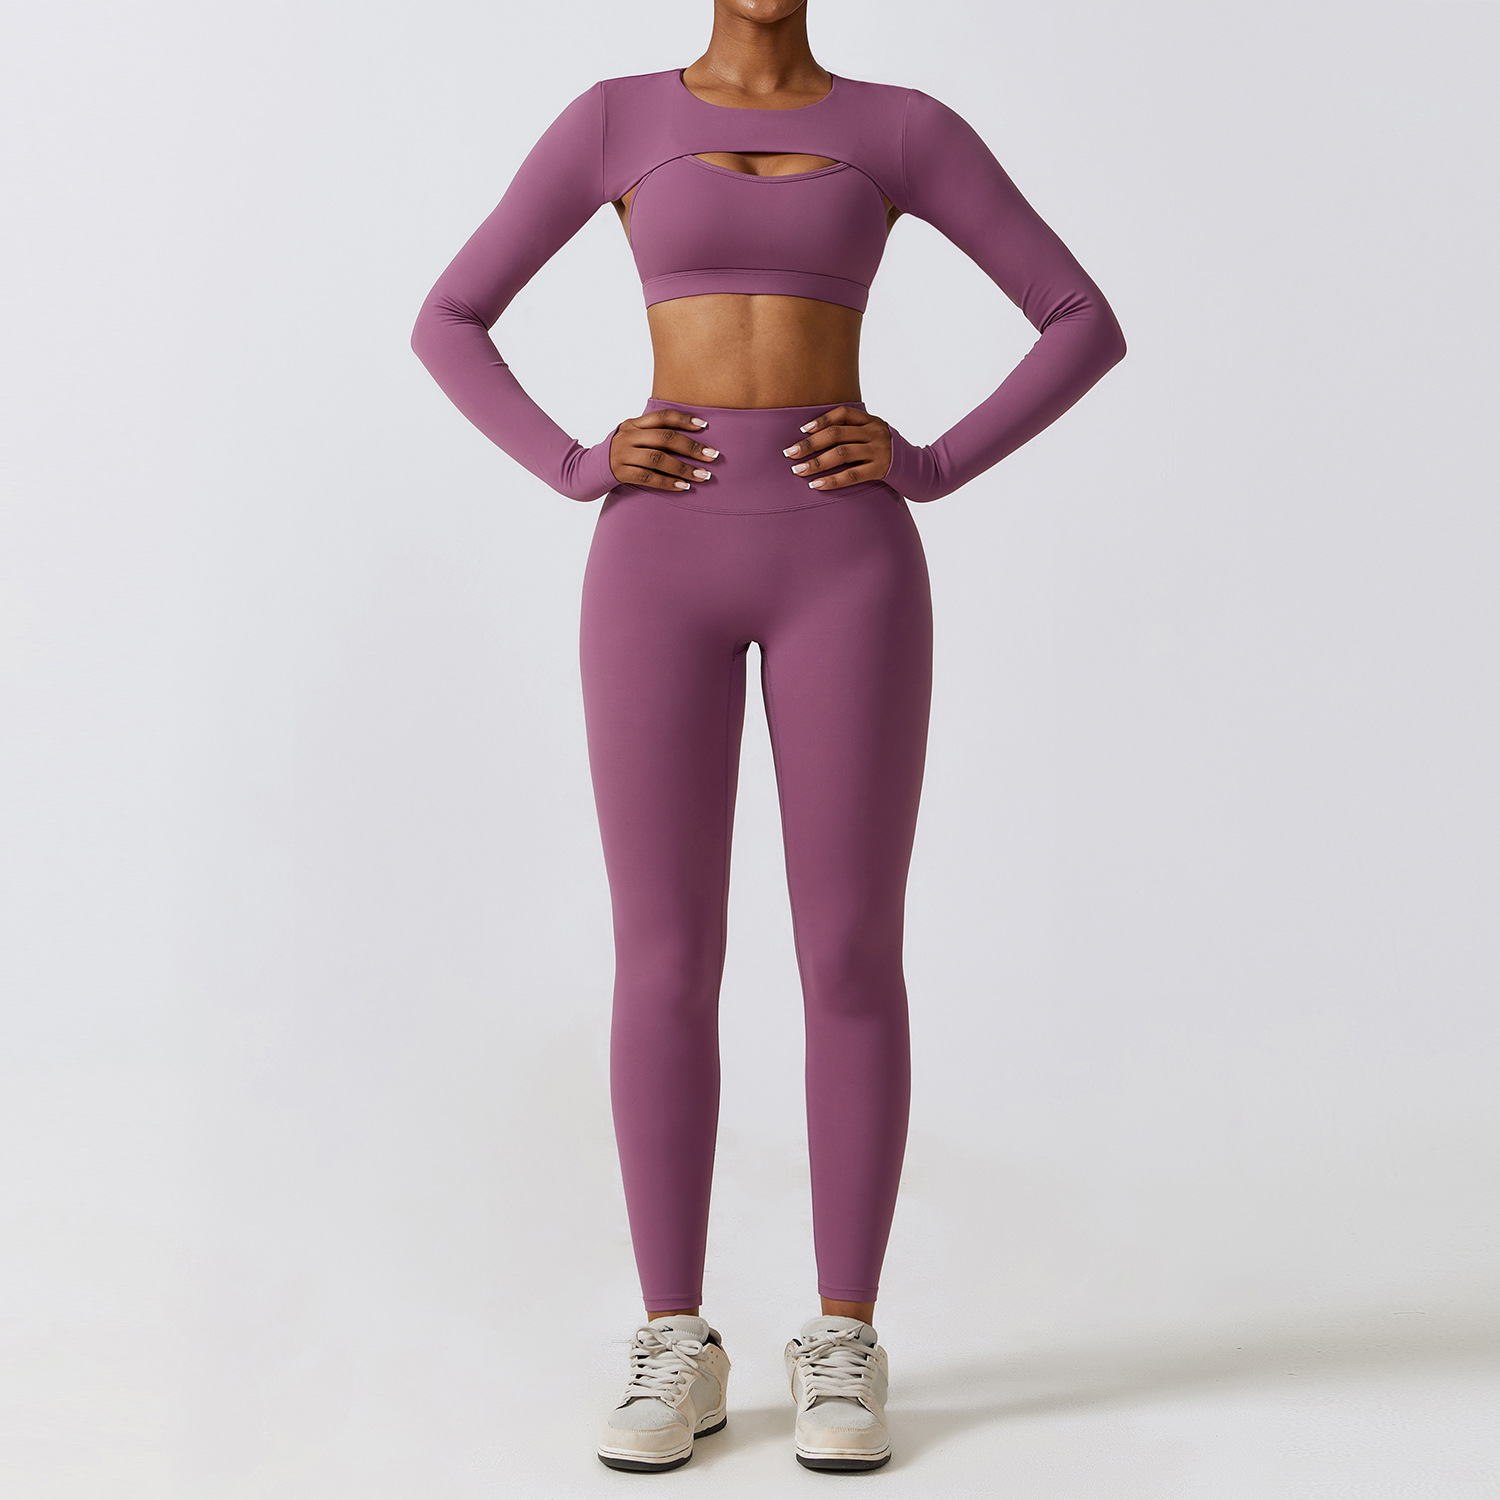 athletic clothing manufacturers